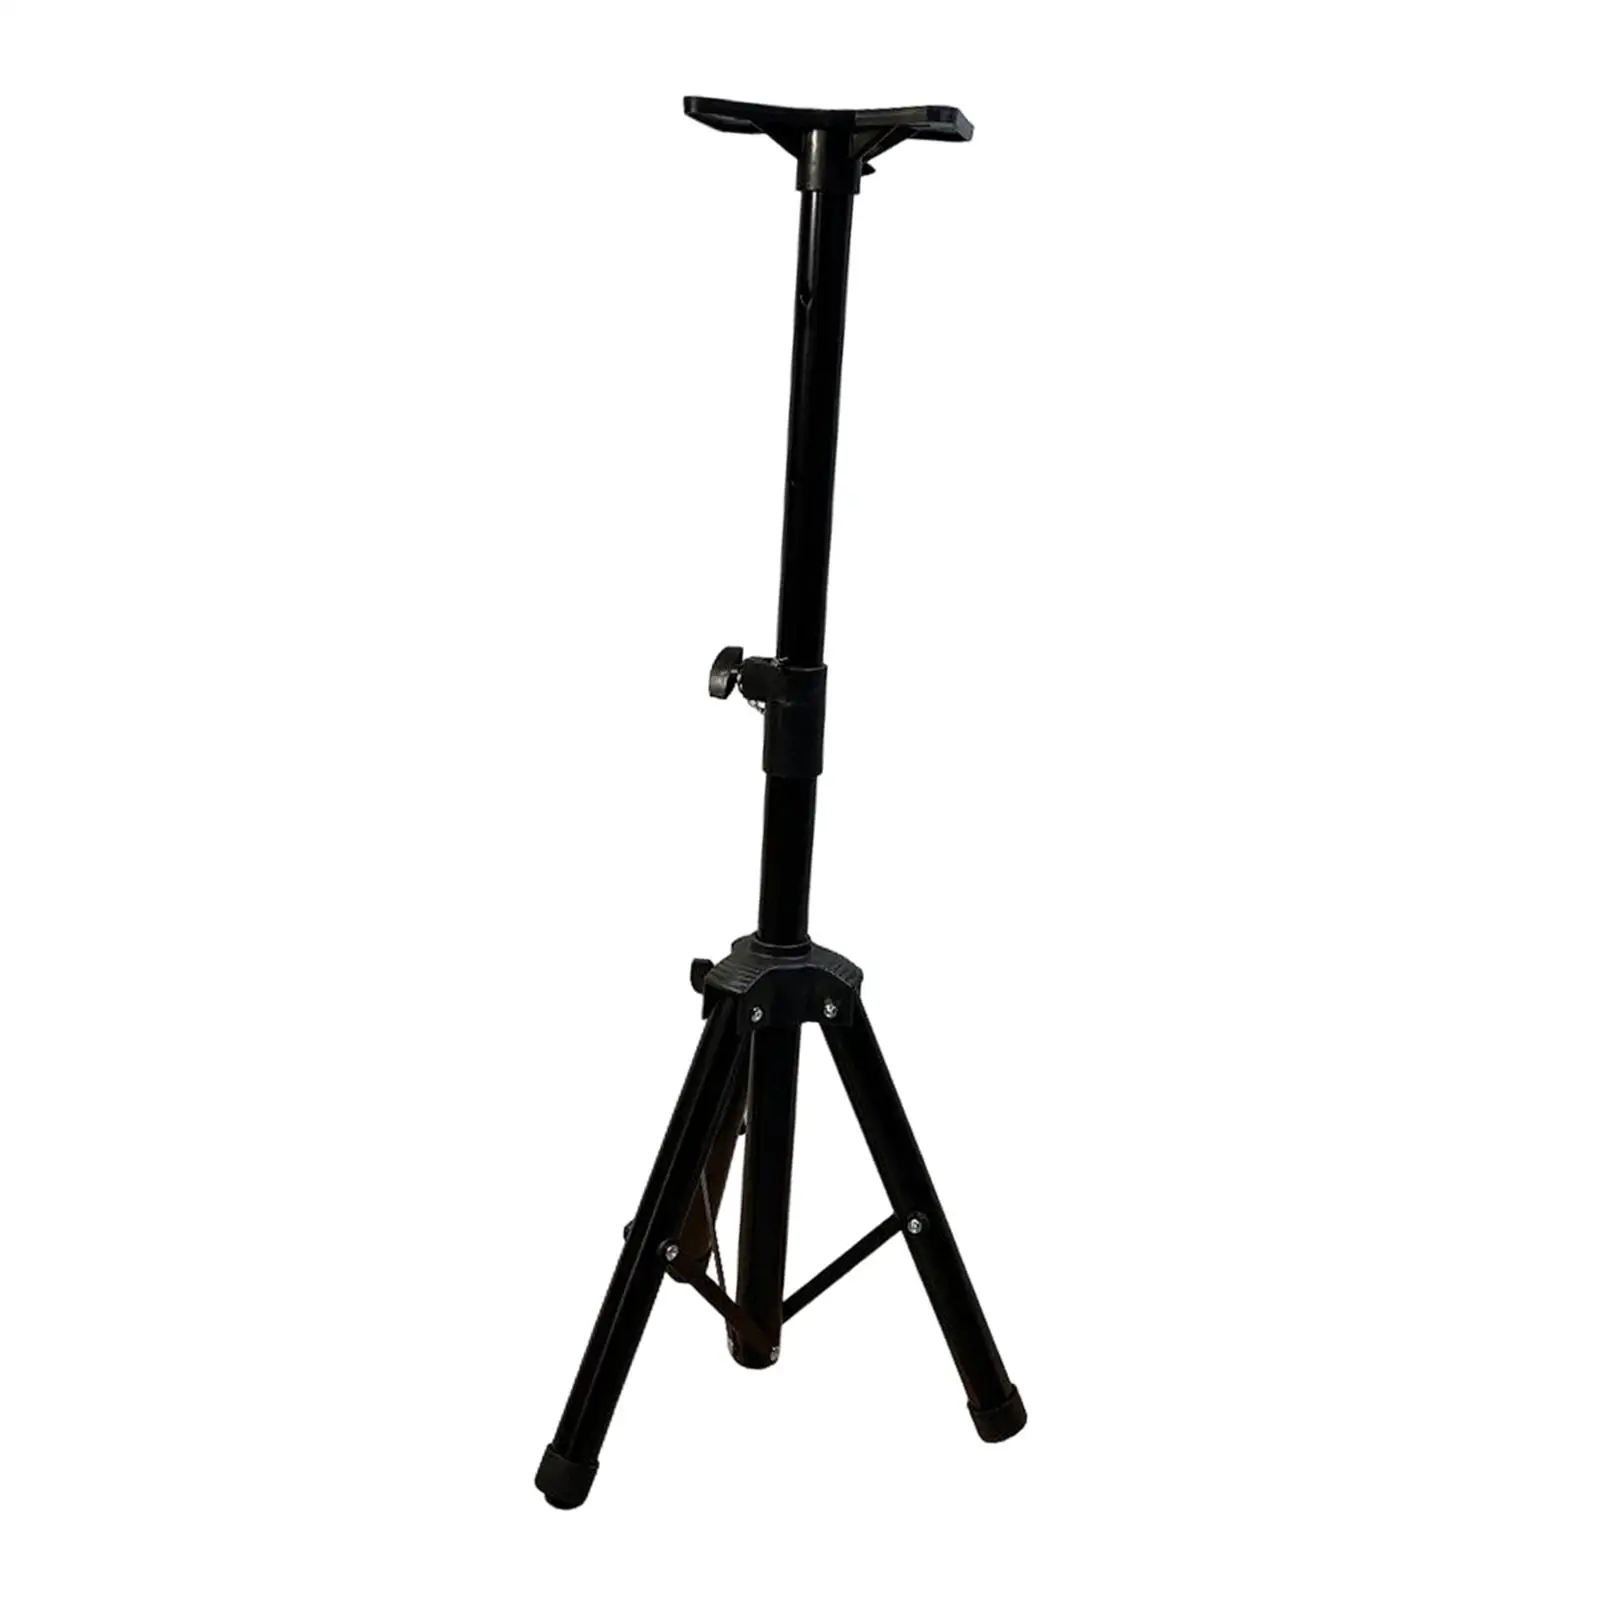 Target Stand for Backyard 45,38,33,30inch Stable Improve Accuracy for Indoor